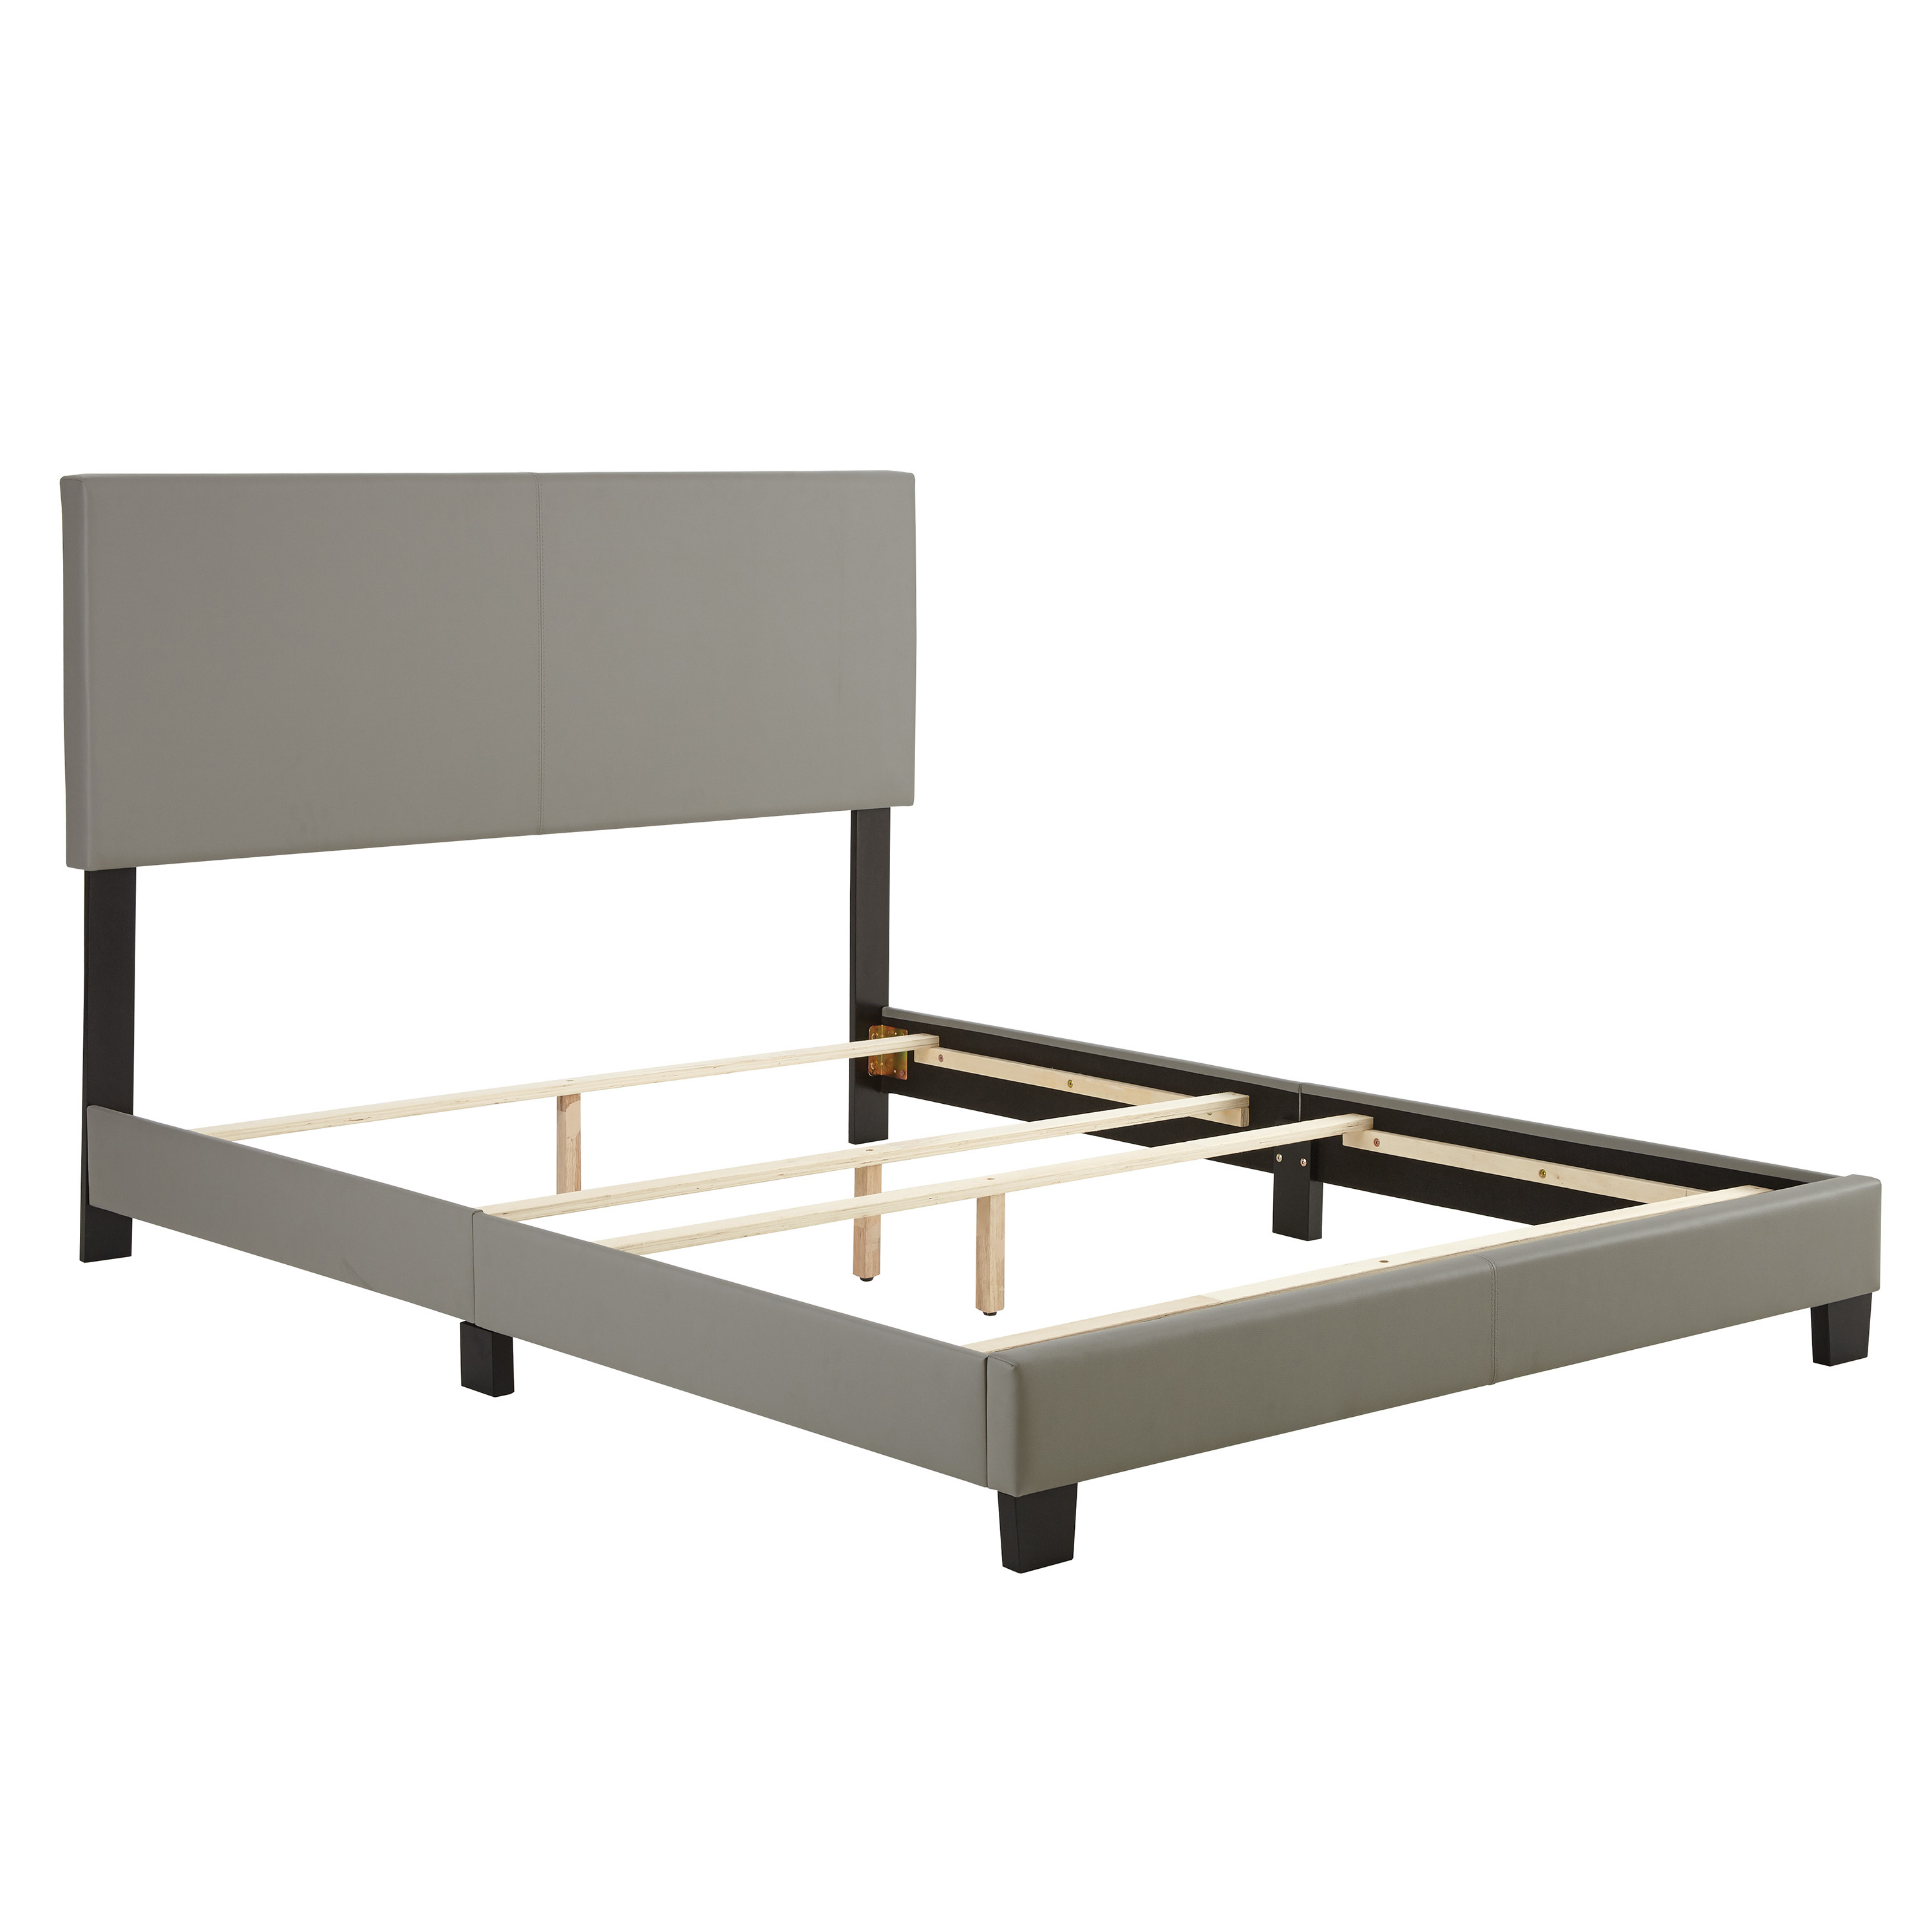 Boyd Sleep Florence King Upholstered Platform Bed, Box Spring Required, Gray Faux Leather - image 3 of 10